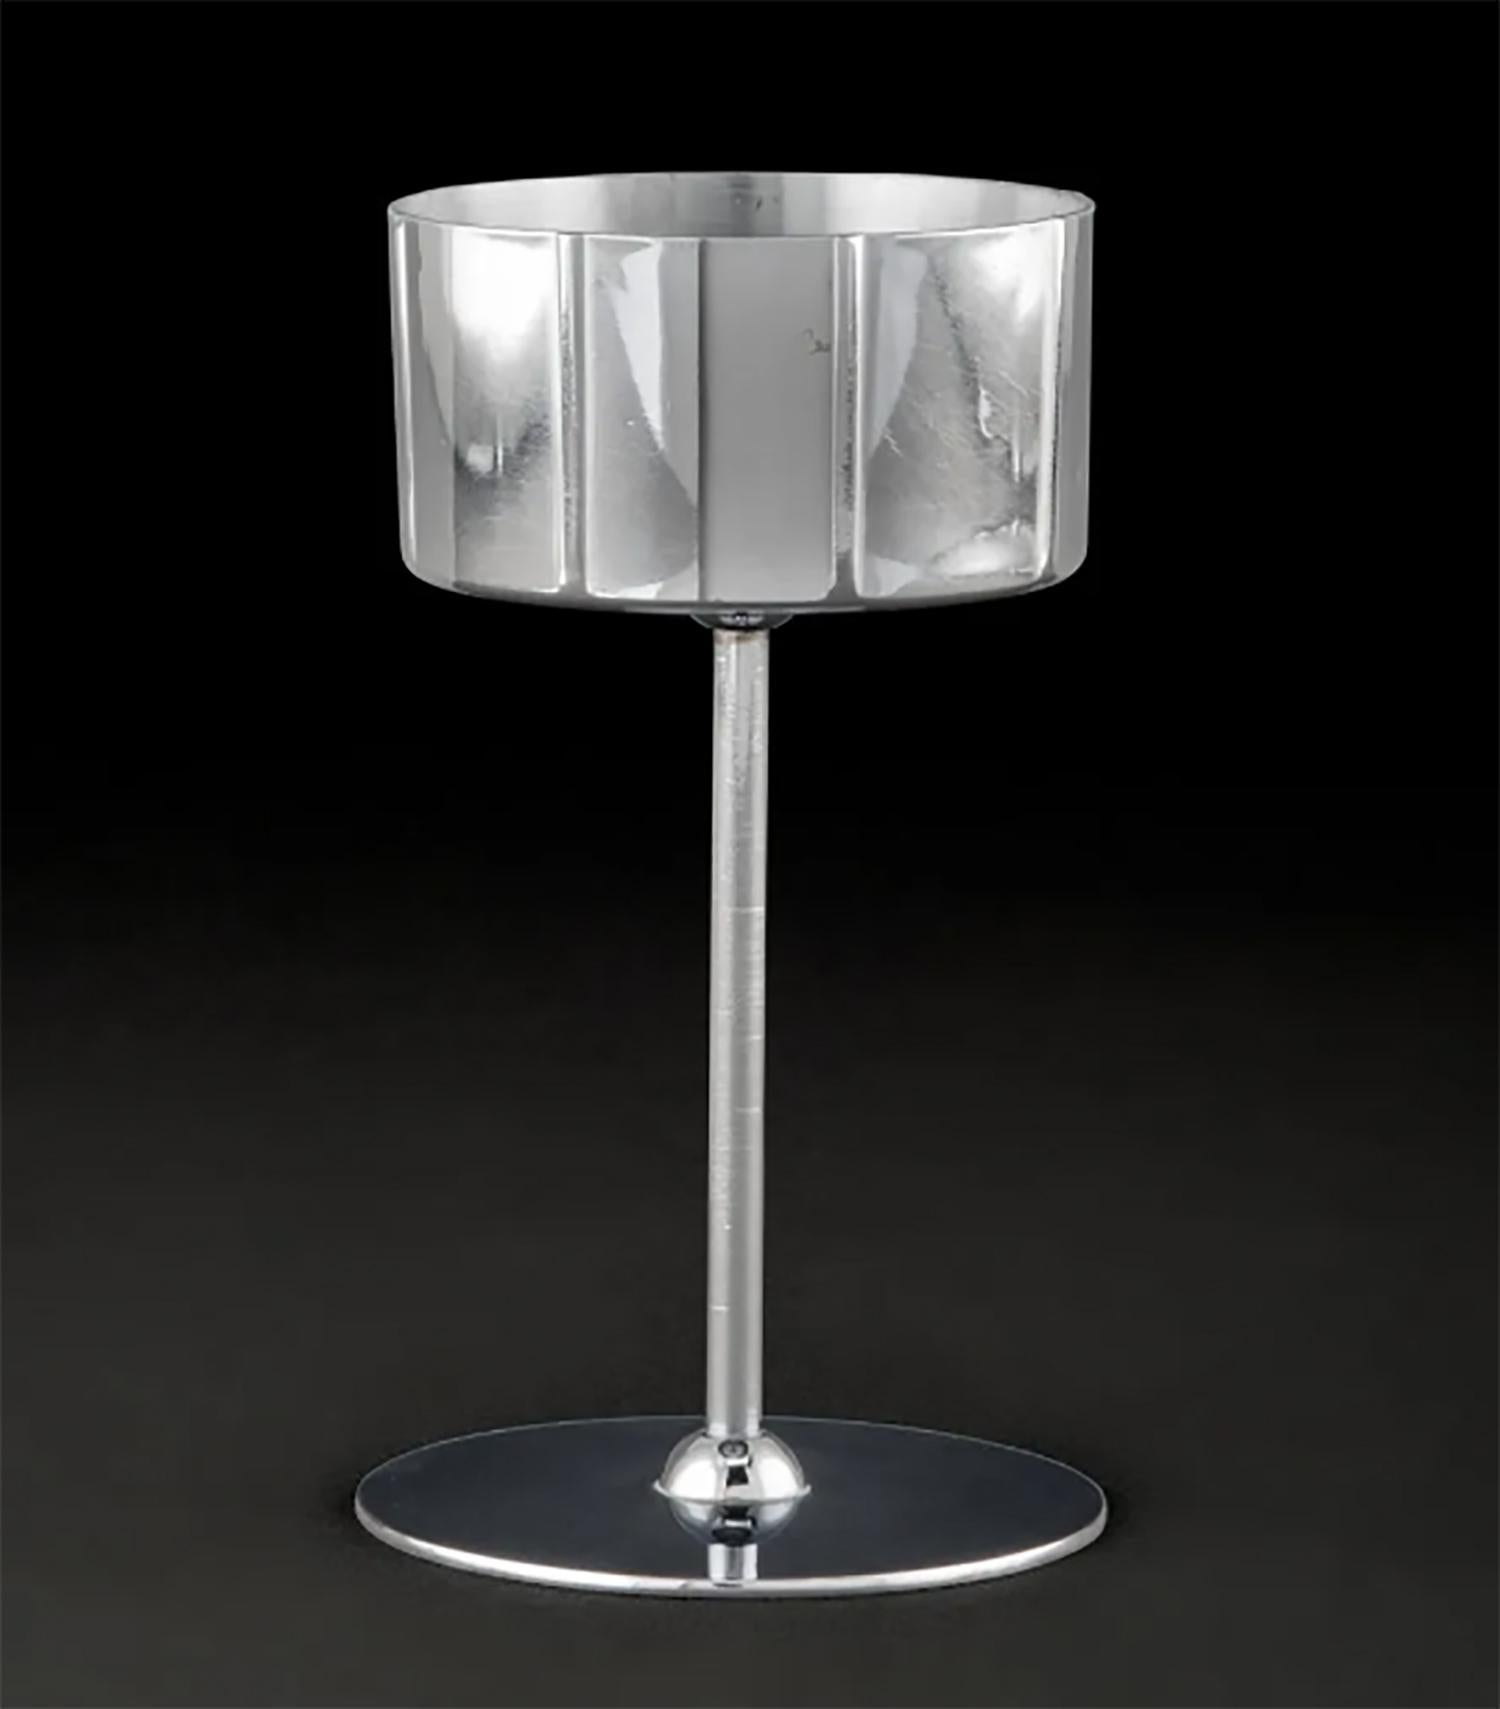 Plated Norman Bel Geddes Manhattan Skyscraper Cocktail Set, an Icon of Revere Art Deco